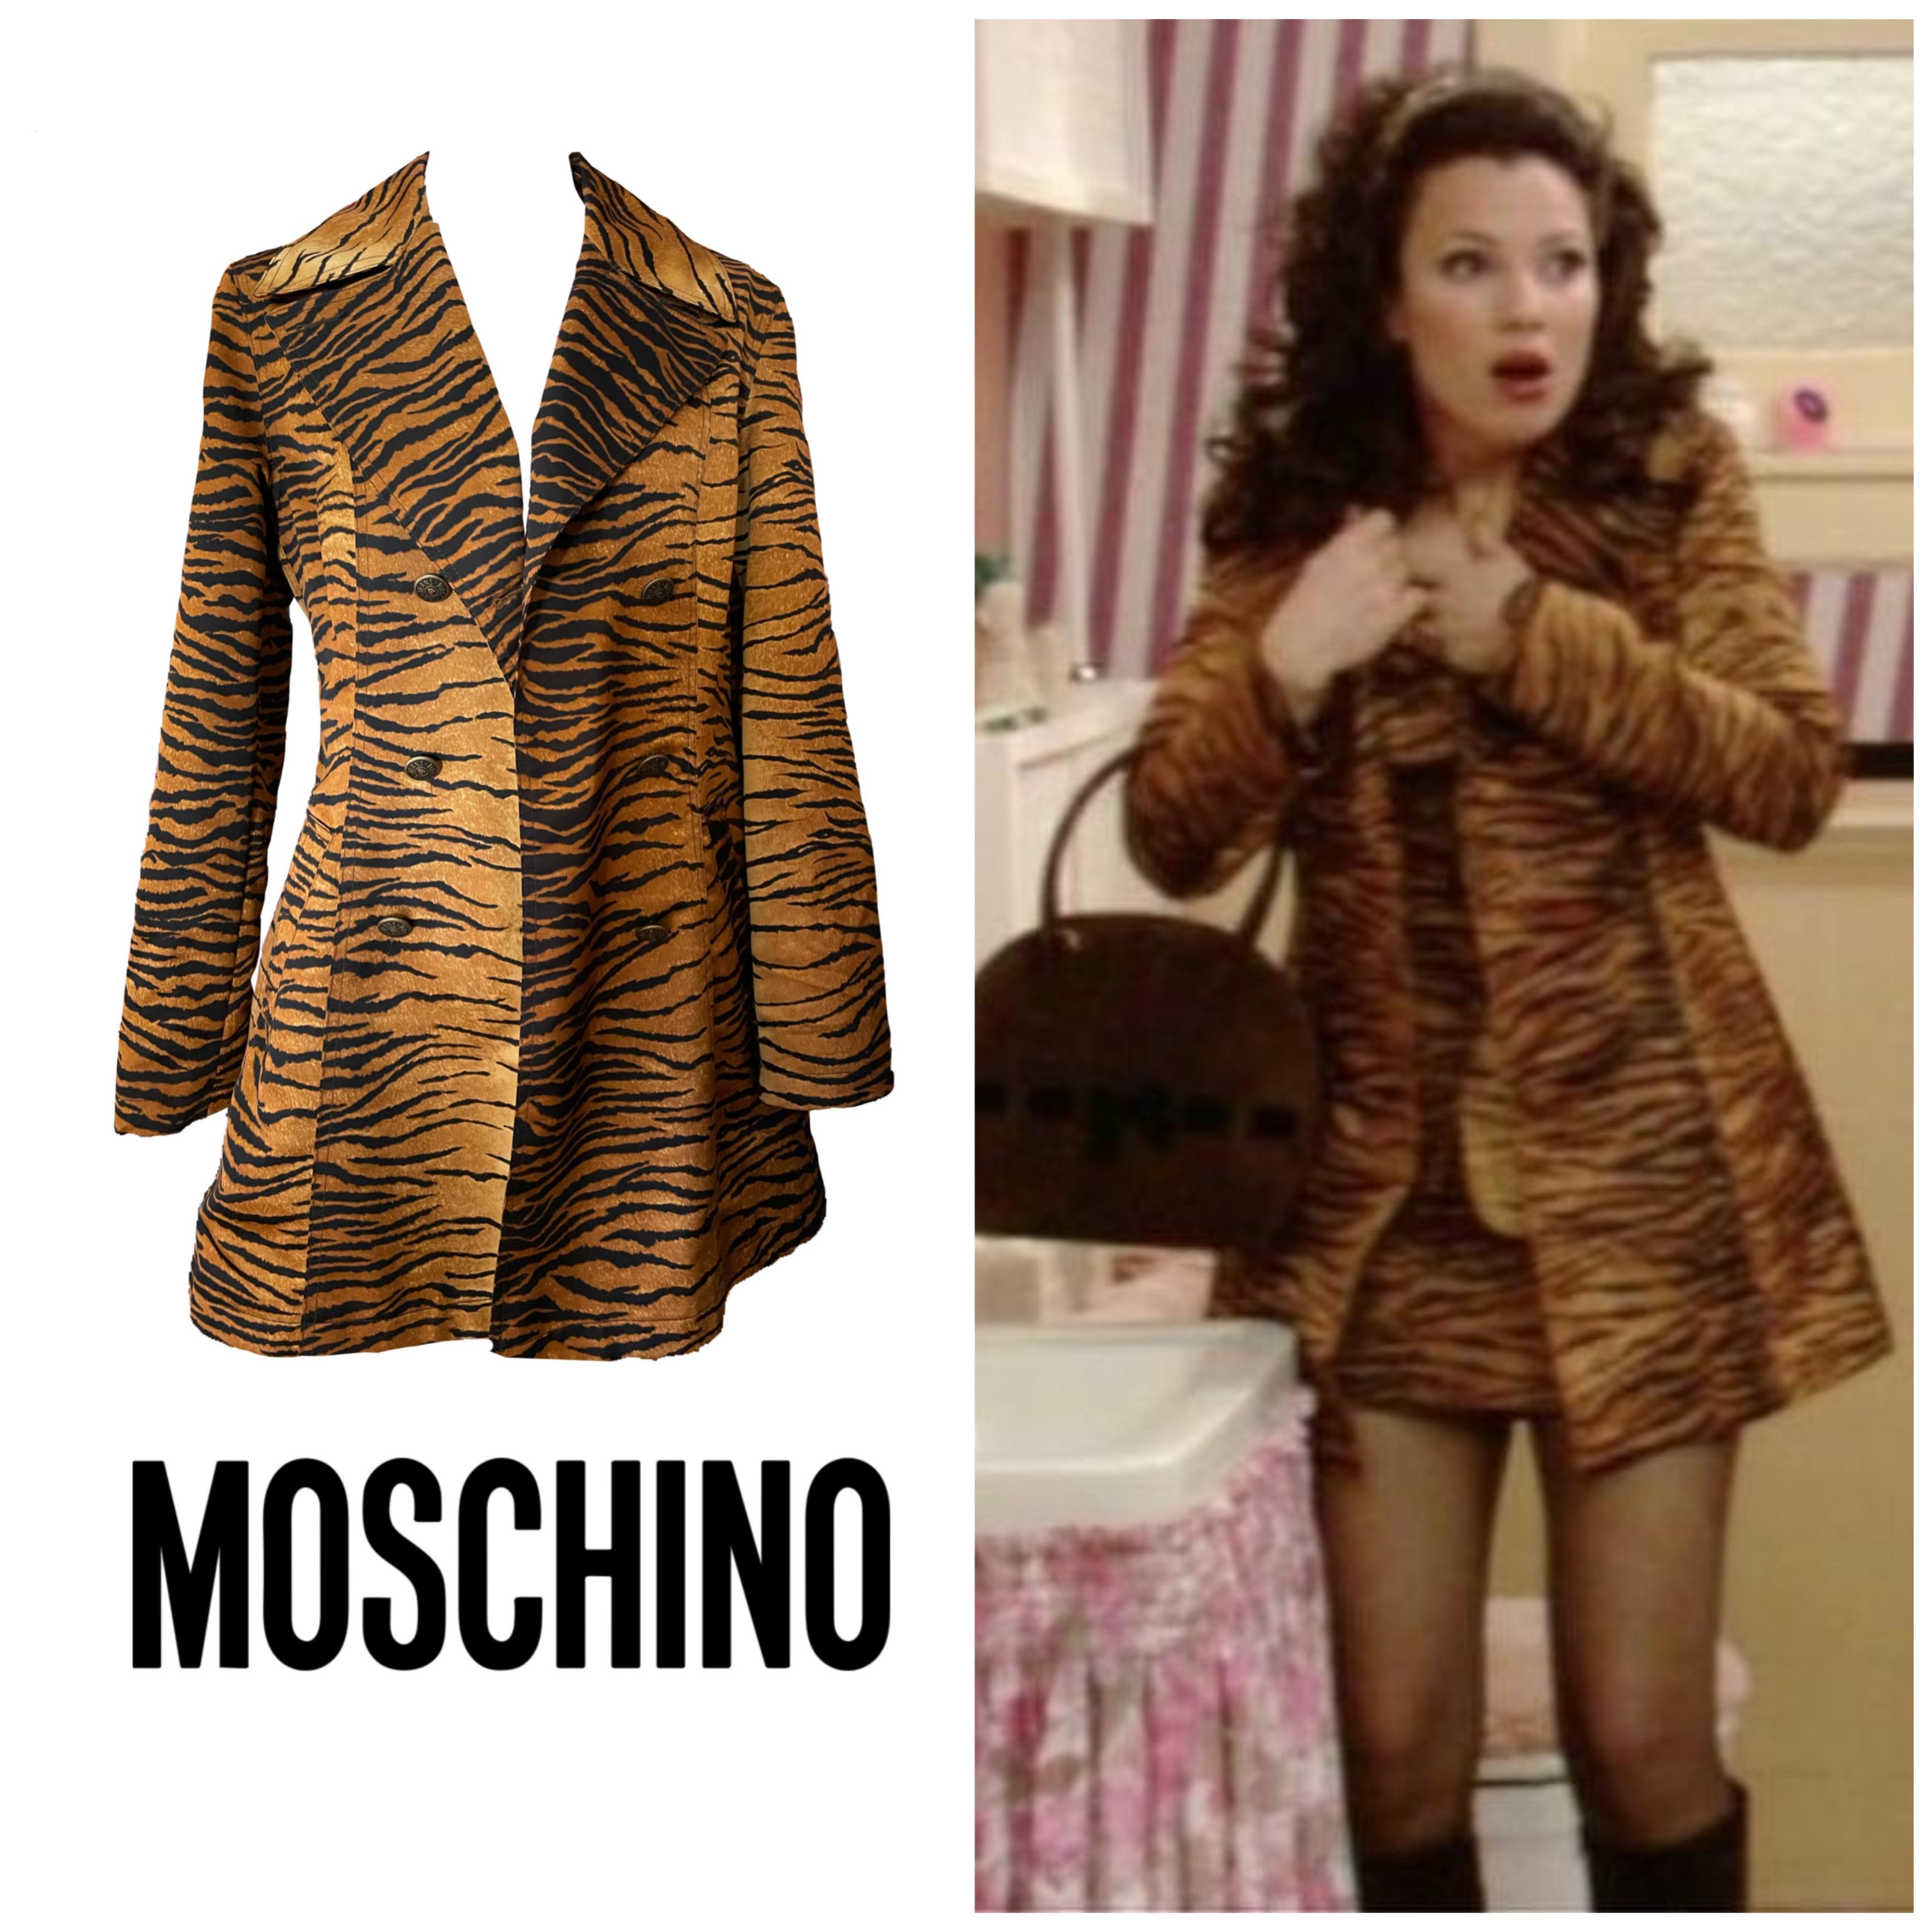 One of a kind  1990s vintage tiger print trench coat by Moschino in perfect condition, like brand new, worn by the one and only Fran fine on the Nanny sitcom. 

Sizes 

FR 38
I 42
UK 12
US 8

Measurements flat :

Shoulders 40 cm 
Armpits 44 cm
Waist